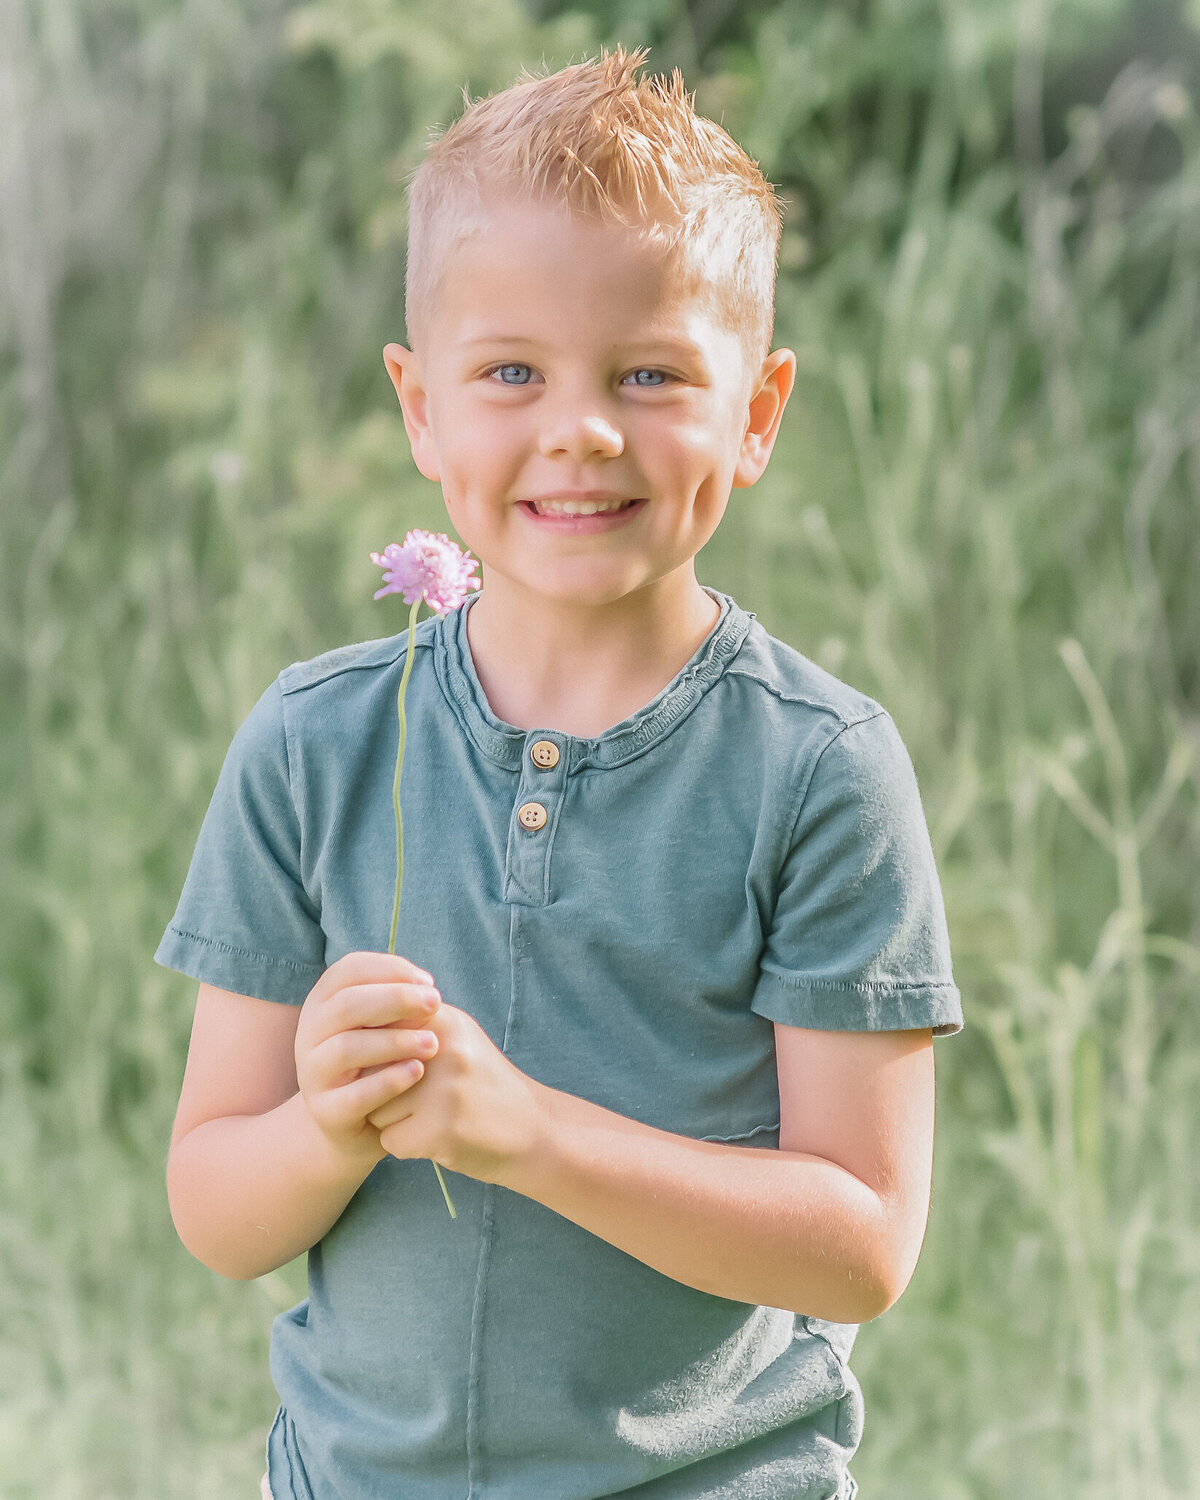 super cute little boy smiling and holding a flower outdoors